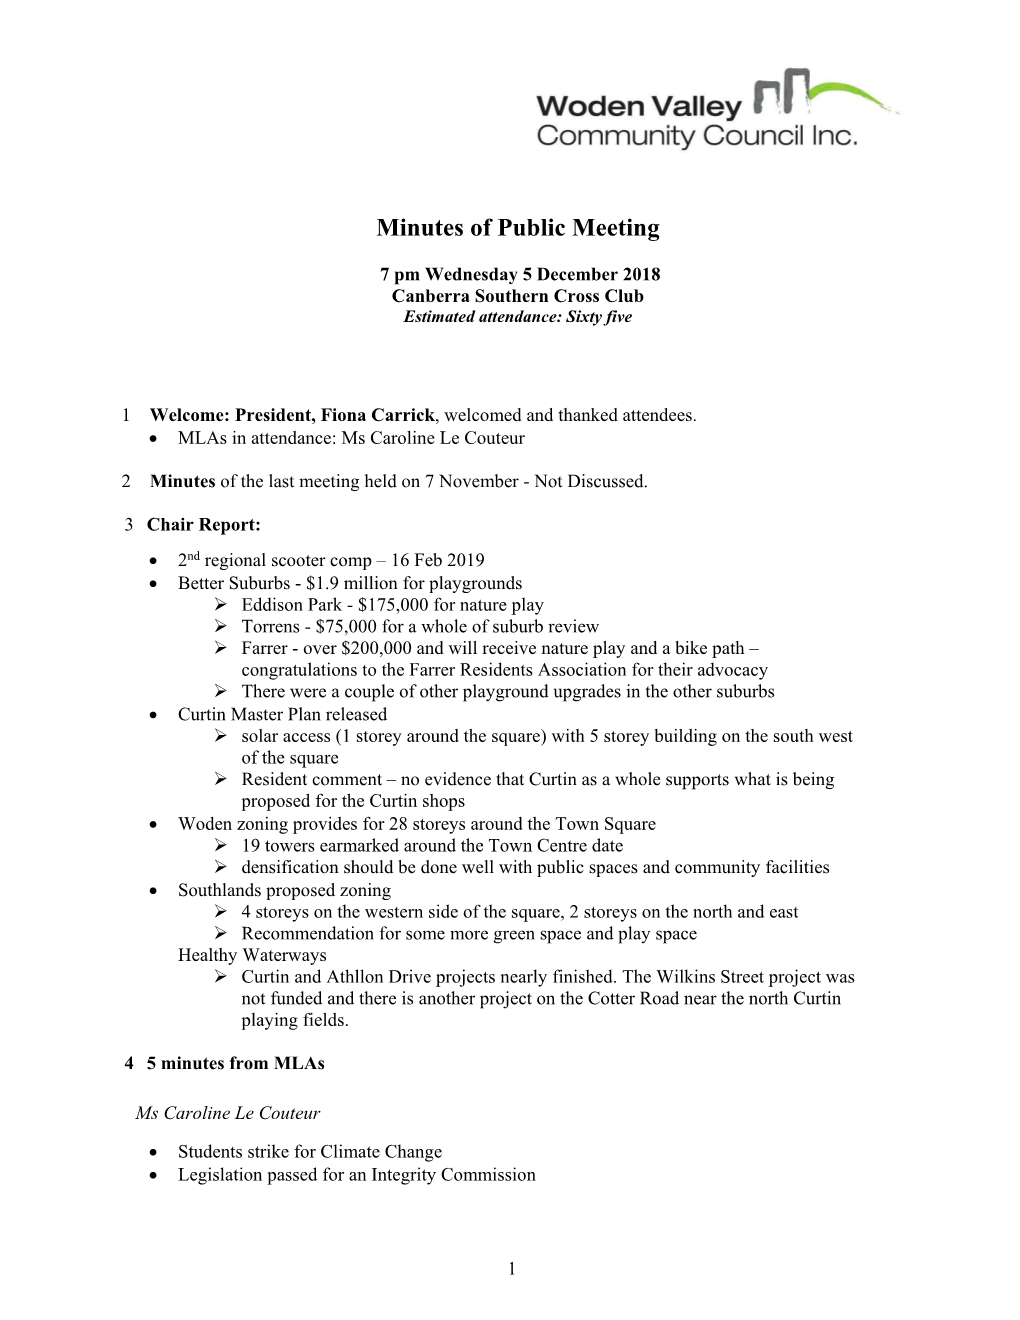 Minutes of Public Meeting